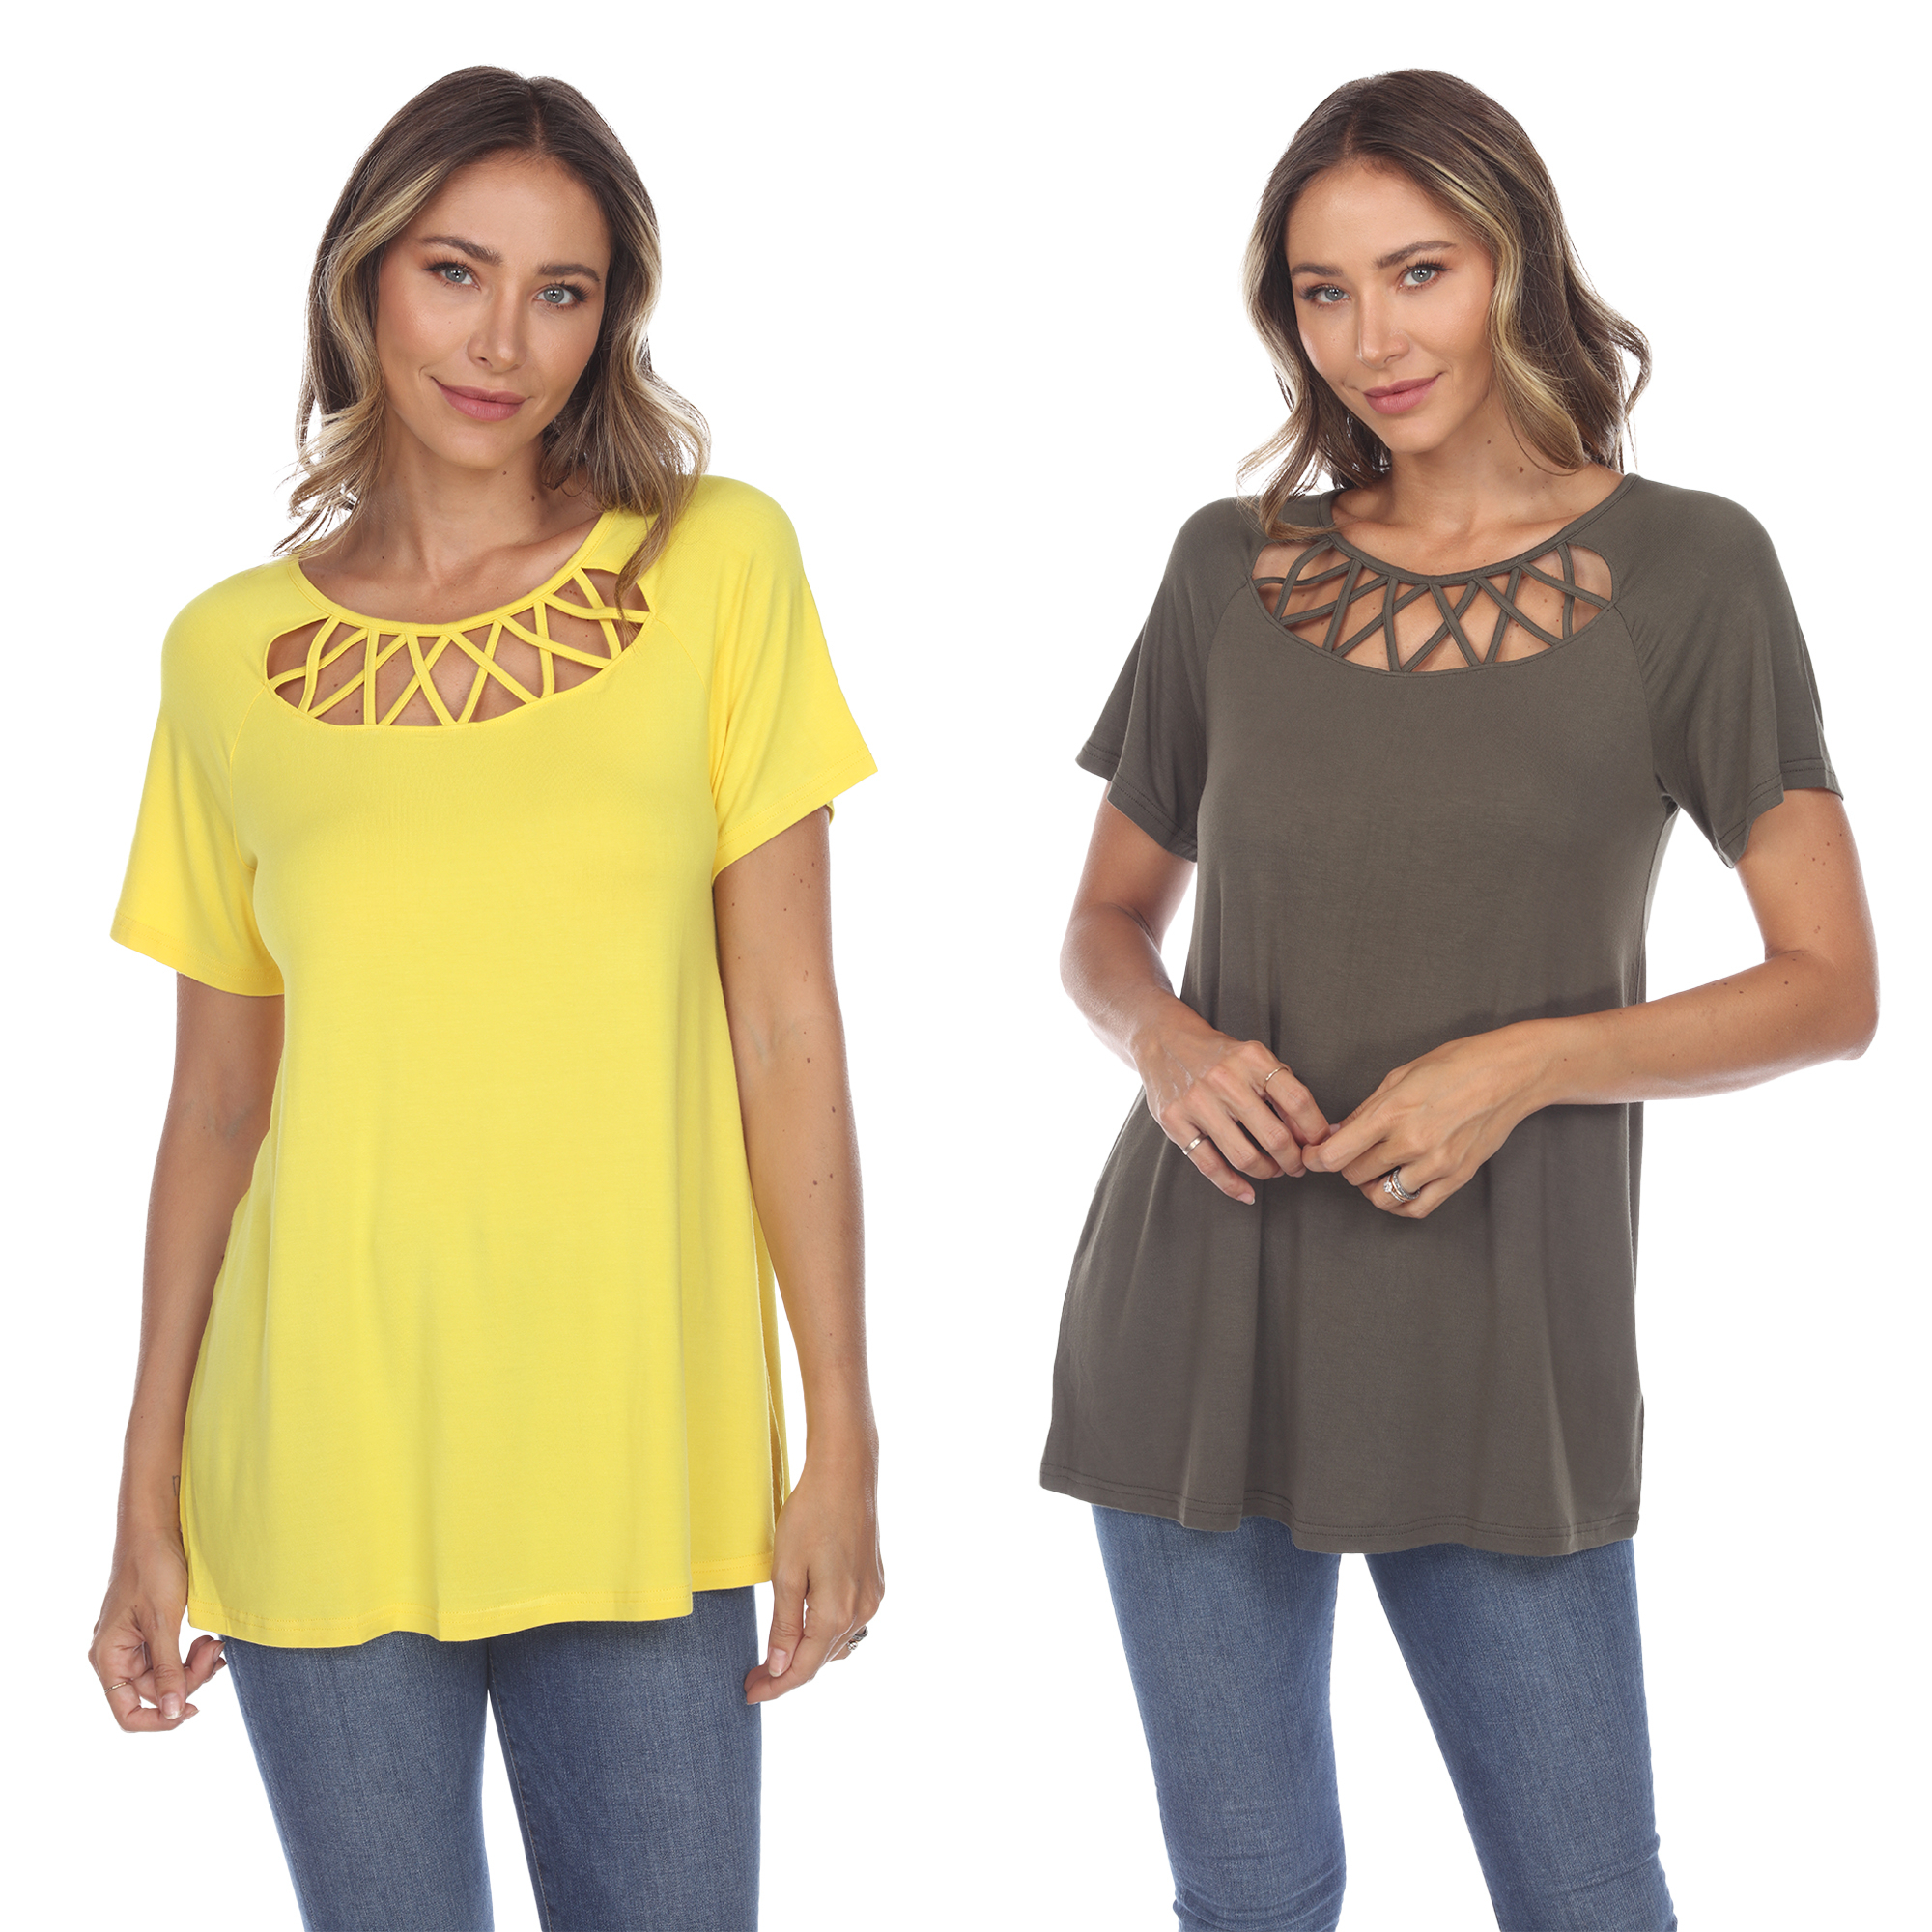 White Mark Women's Pack Of 2 Yellow Crisscross Short Sleeve Top - Yellow Olive, Small